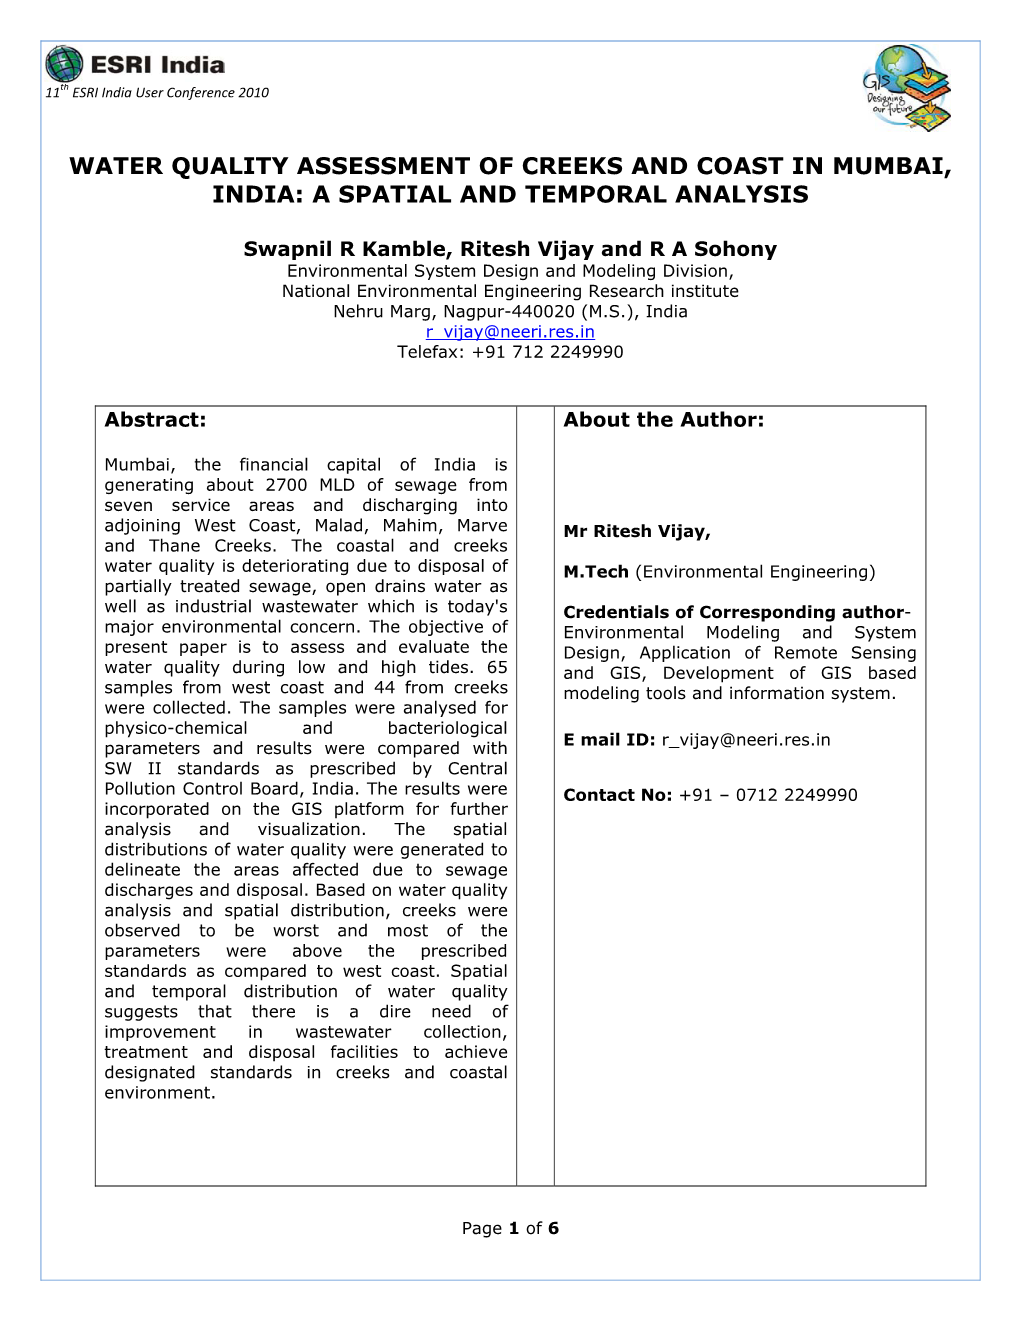 Water Quality Assessment of Creeks and Coast in Mumbai, India: a Spatial and Temporal Analysis